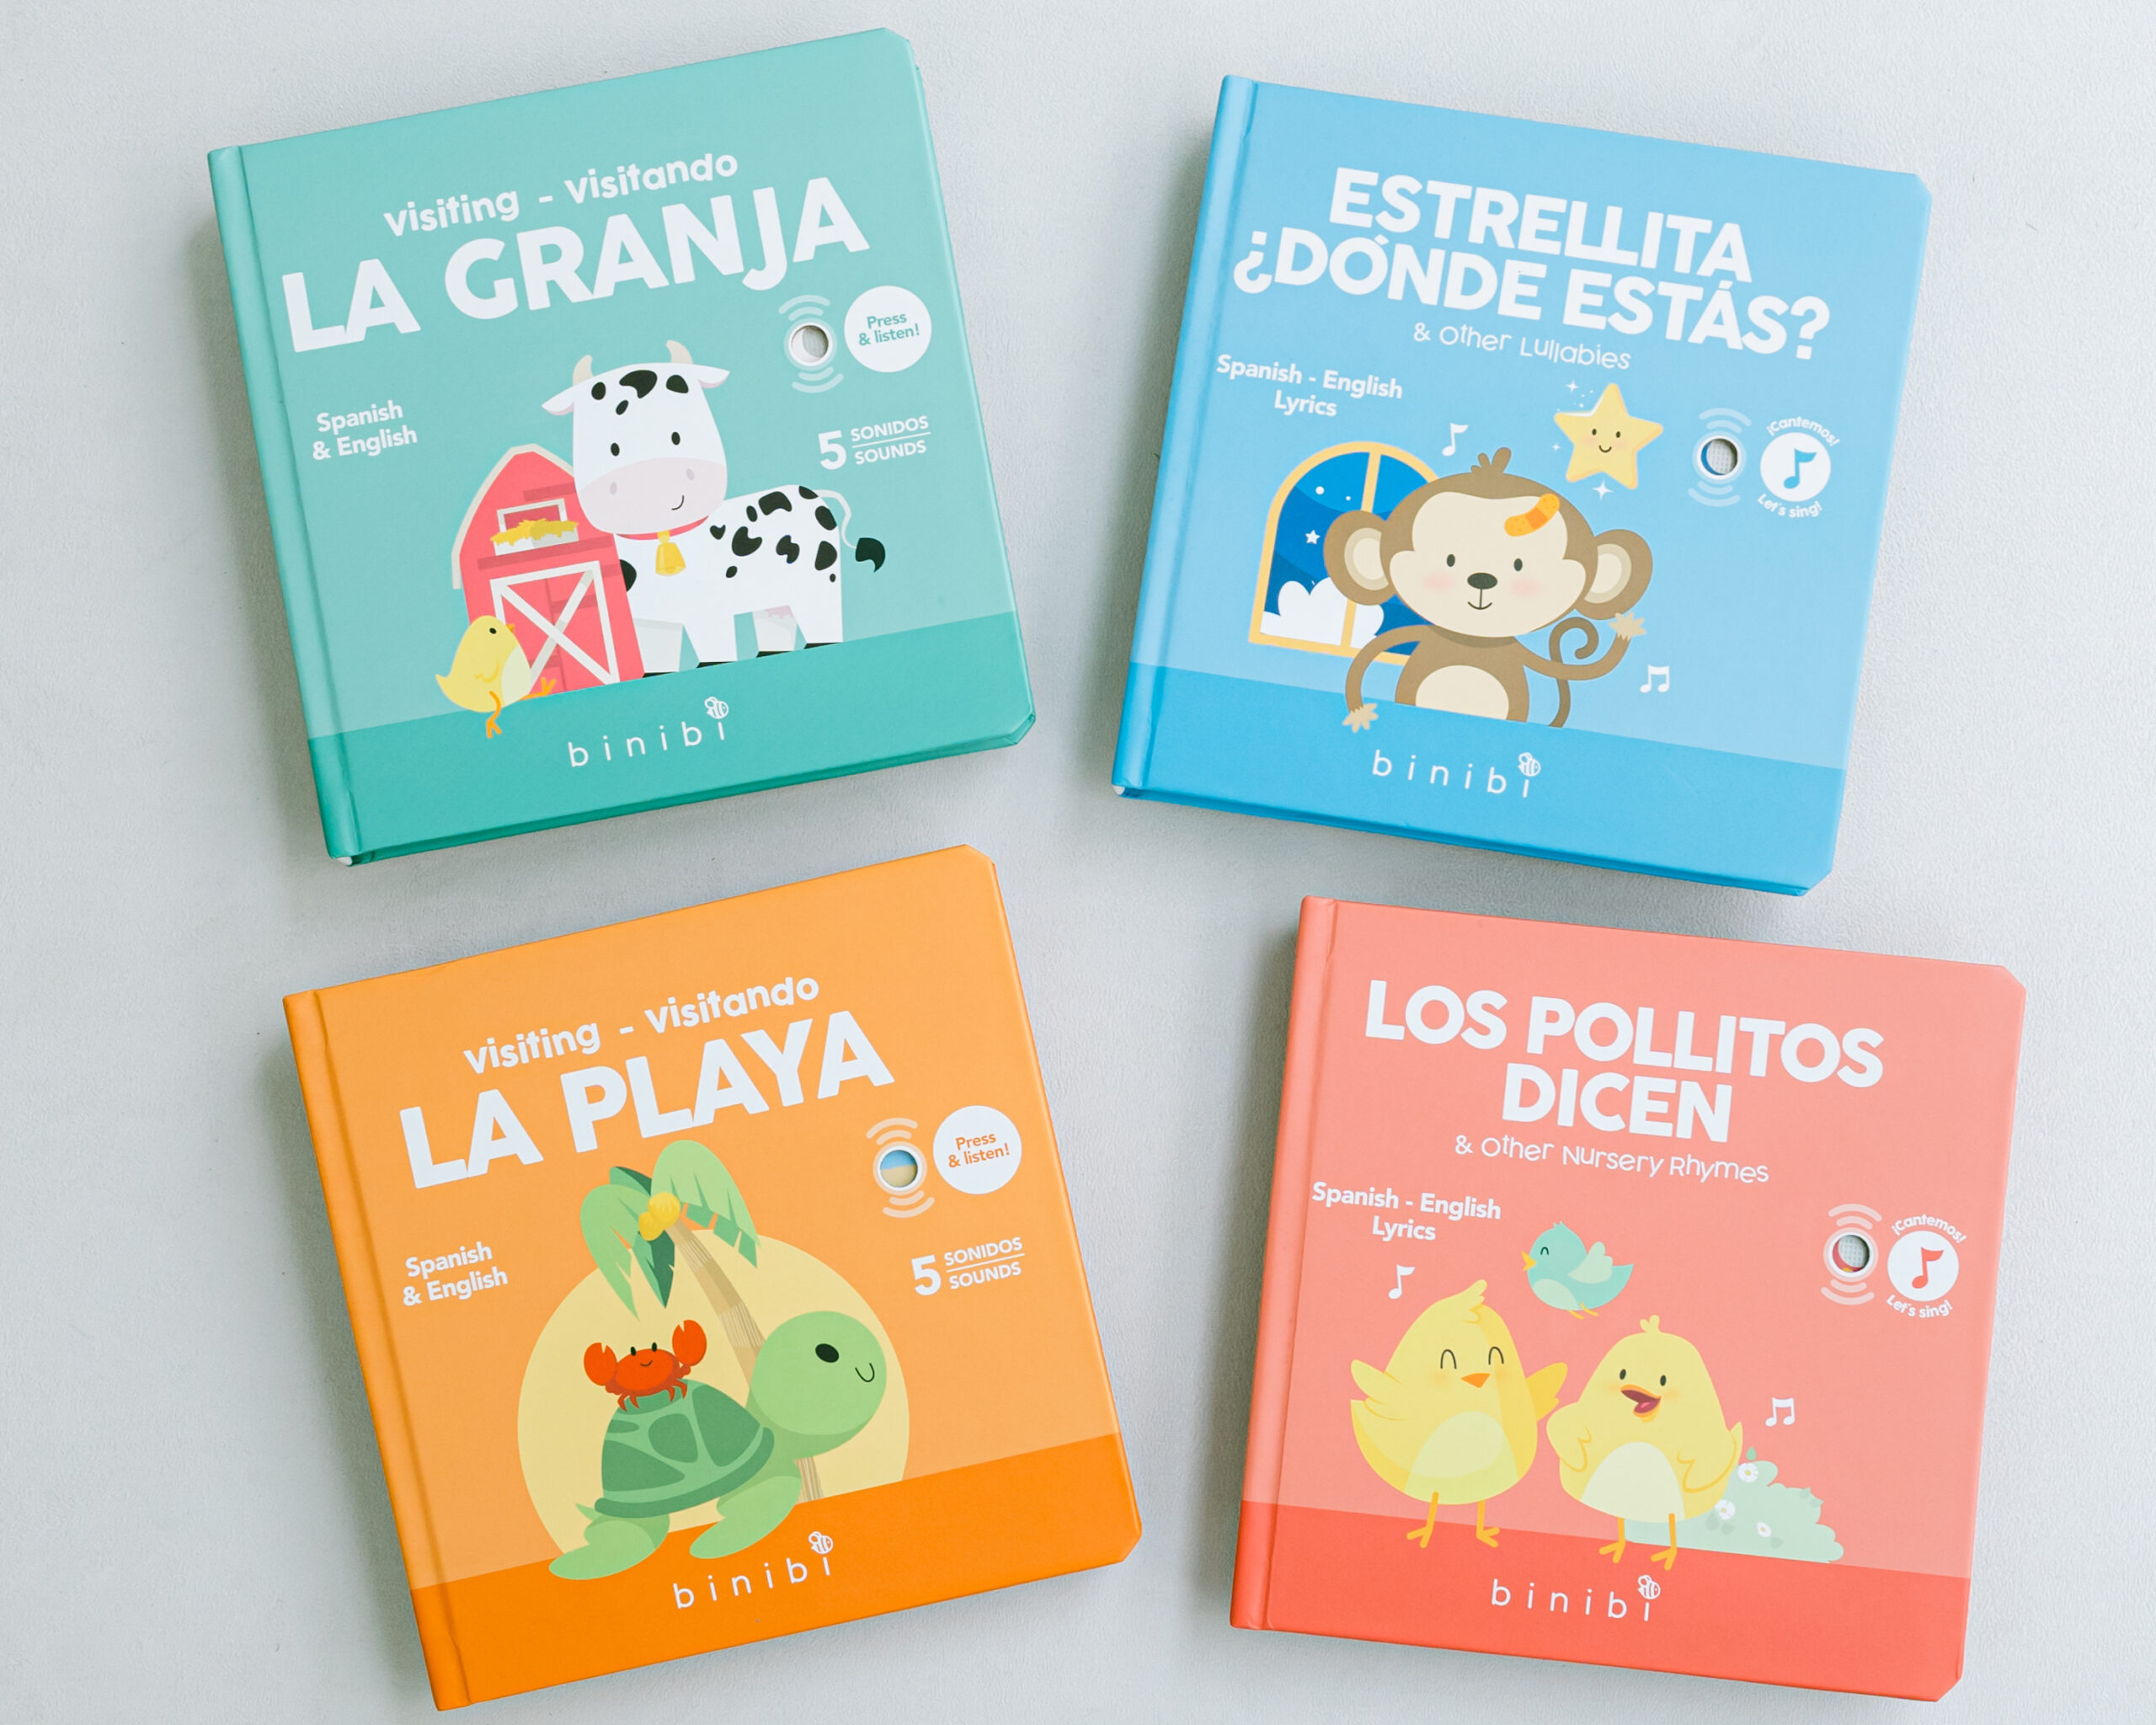 Gift Binibi’s Bilingual Education Sound Book Collection